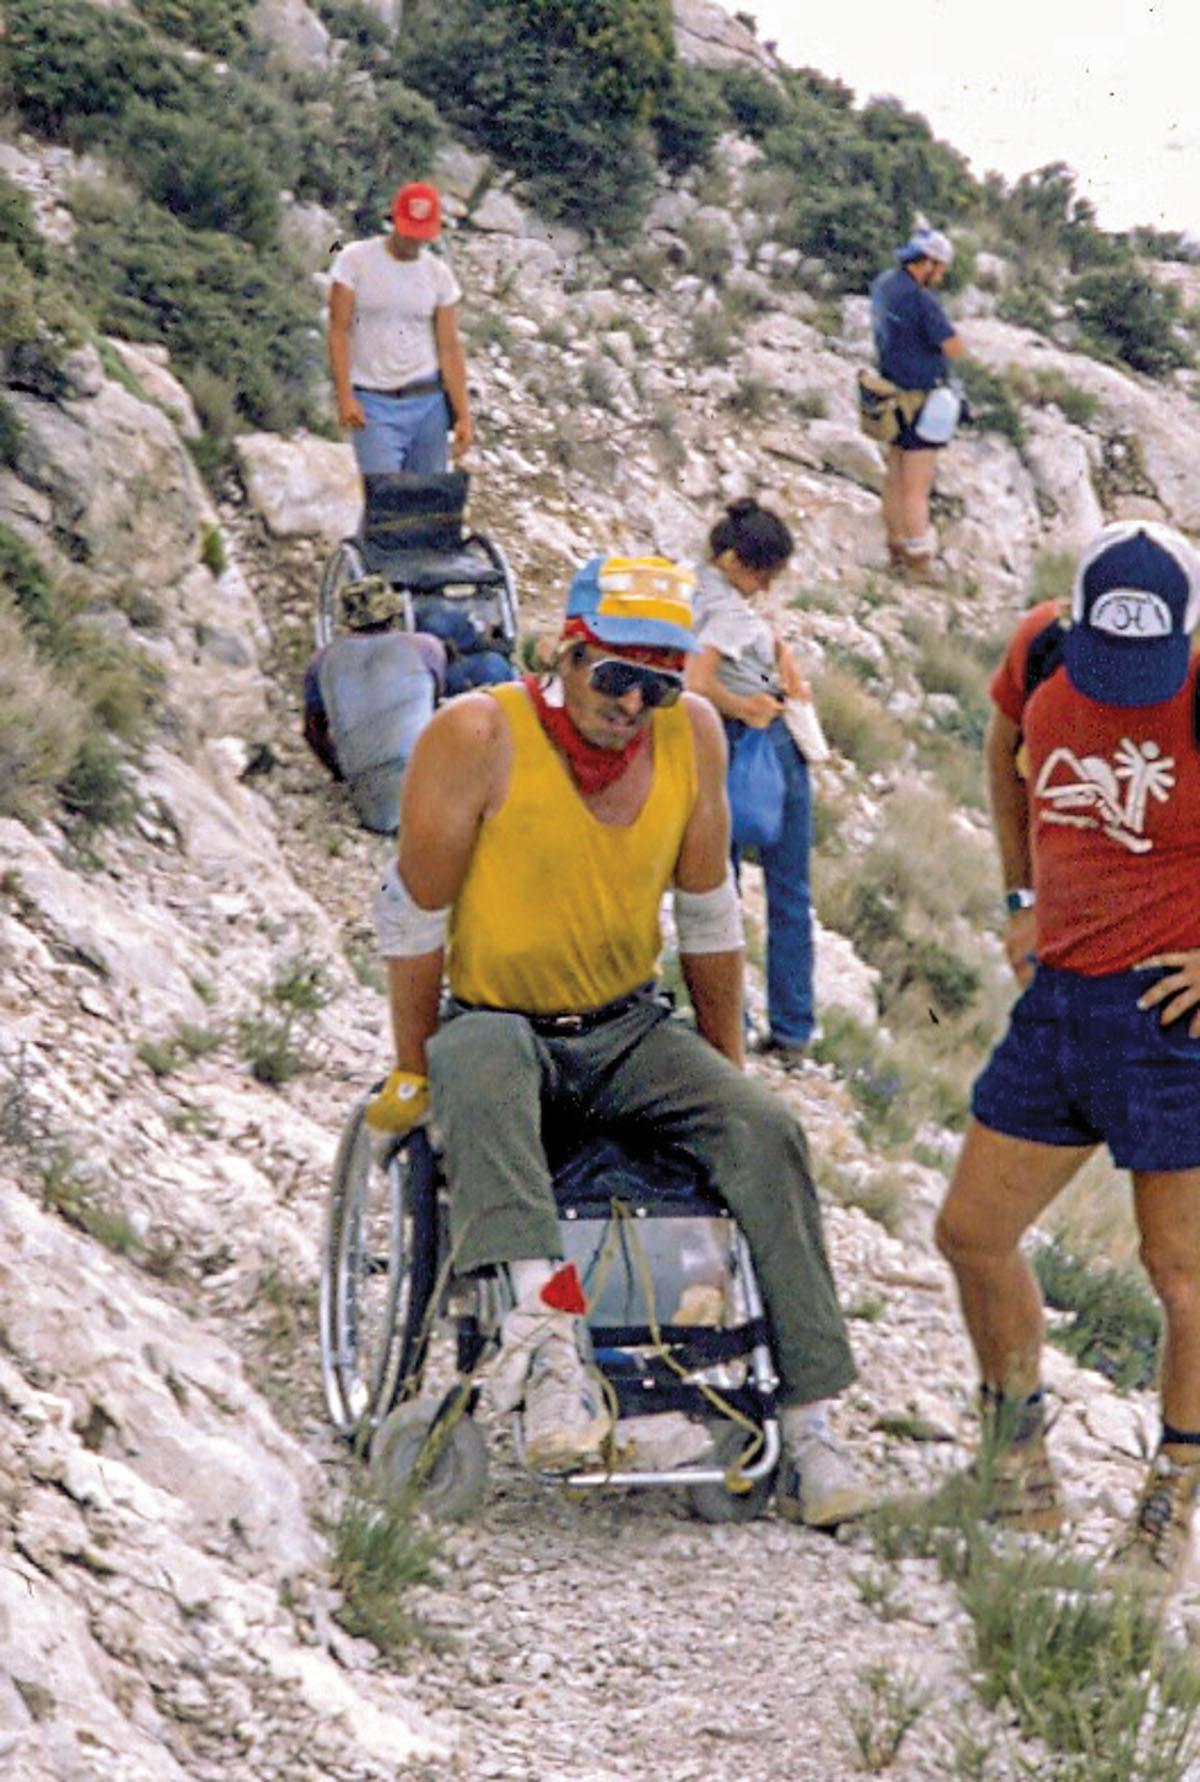 A man in a yellow shirt uses a wheelchair to traverse rocky terrain while several onlookers offer support